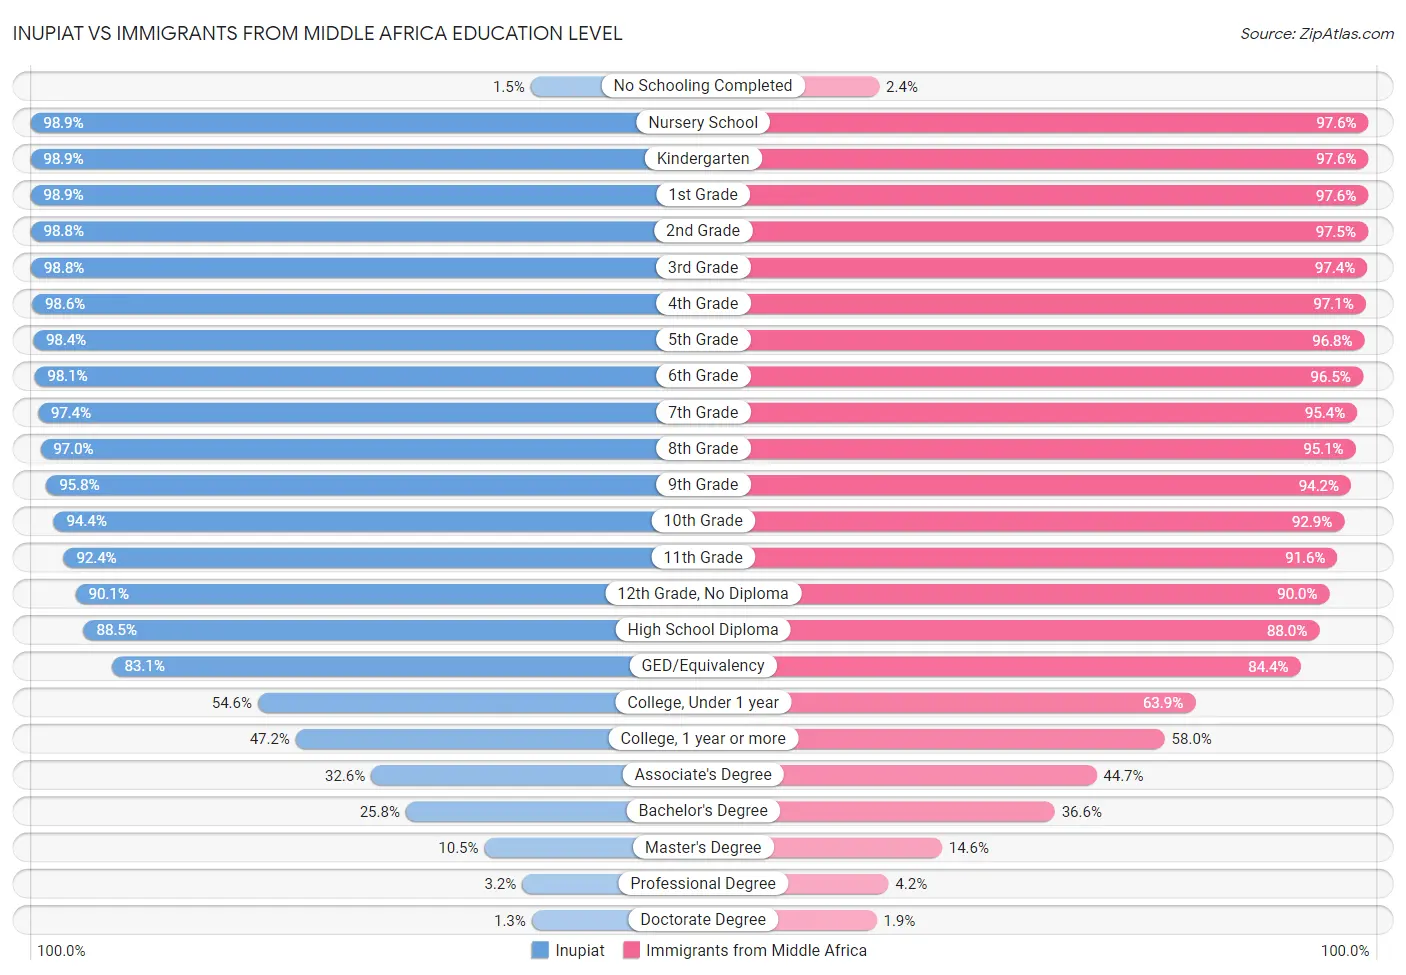 Inupiat vs Immigrants from Middle Africa Education Level